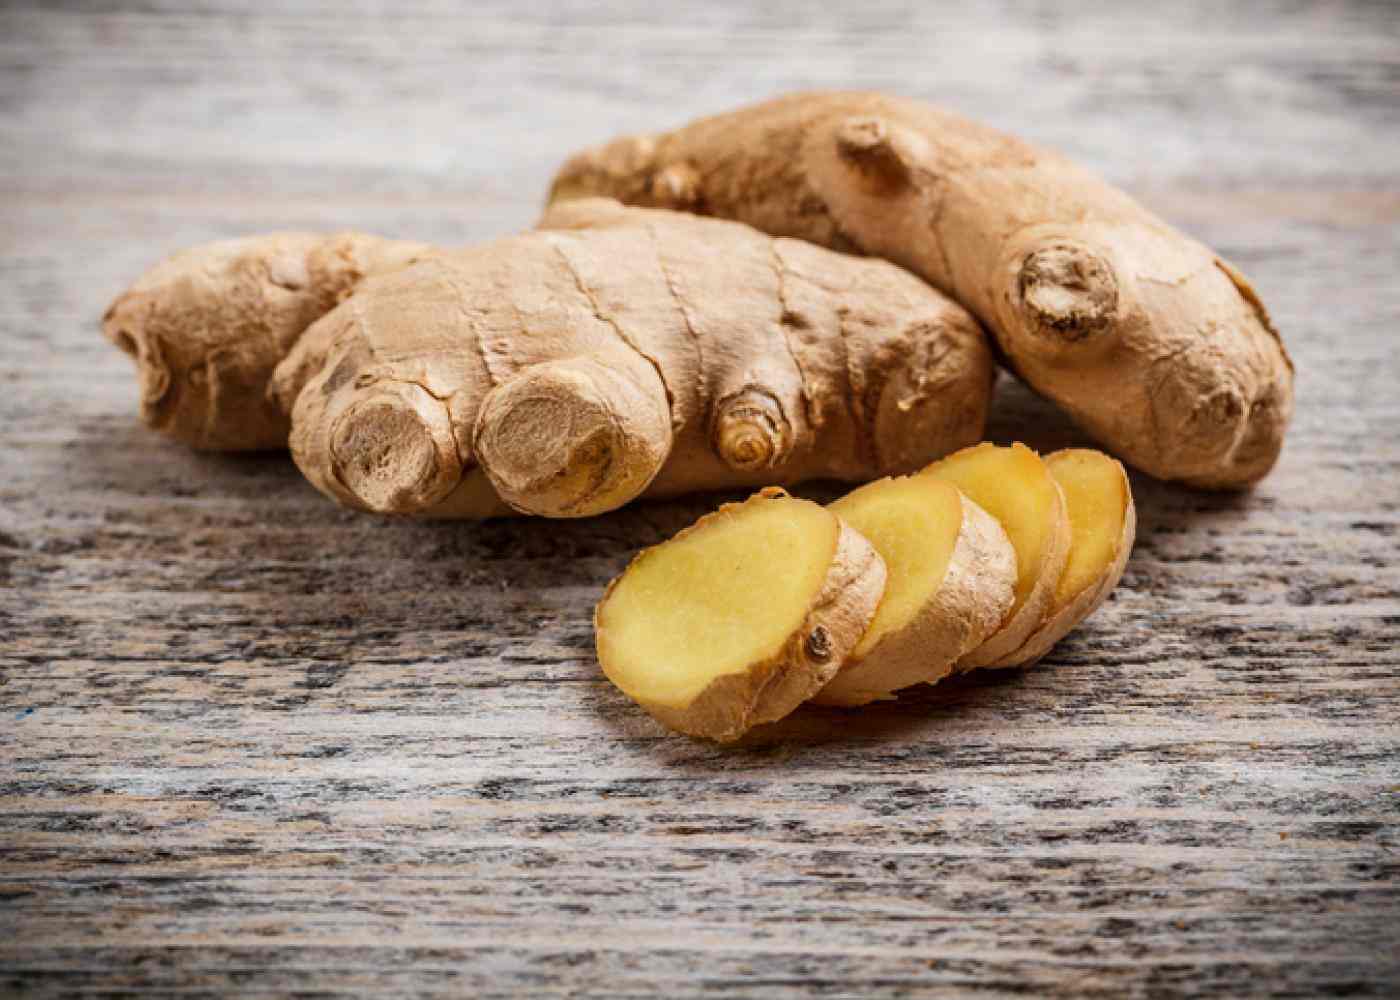 Ginger as home remedy go to coughs and start therapy